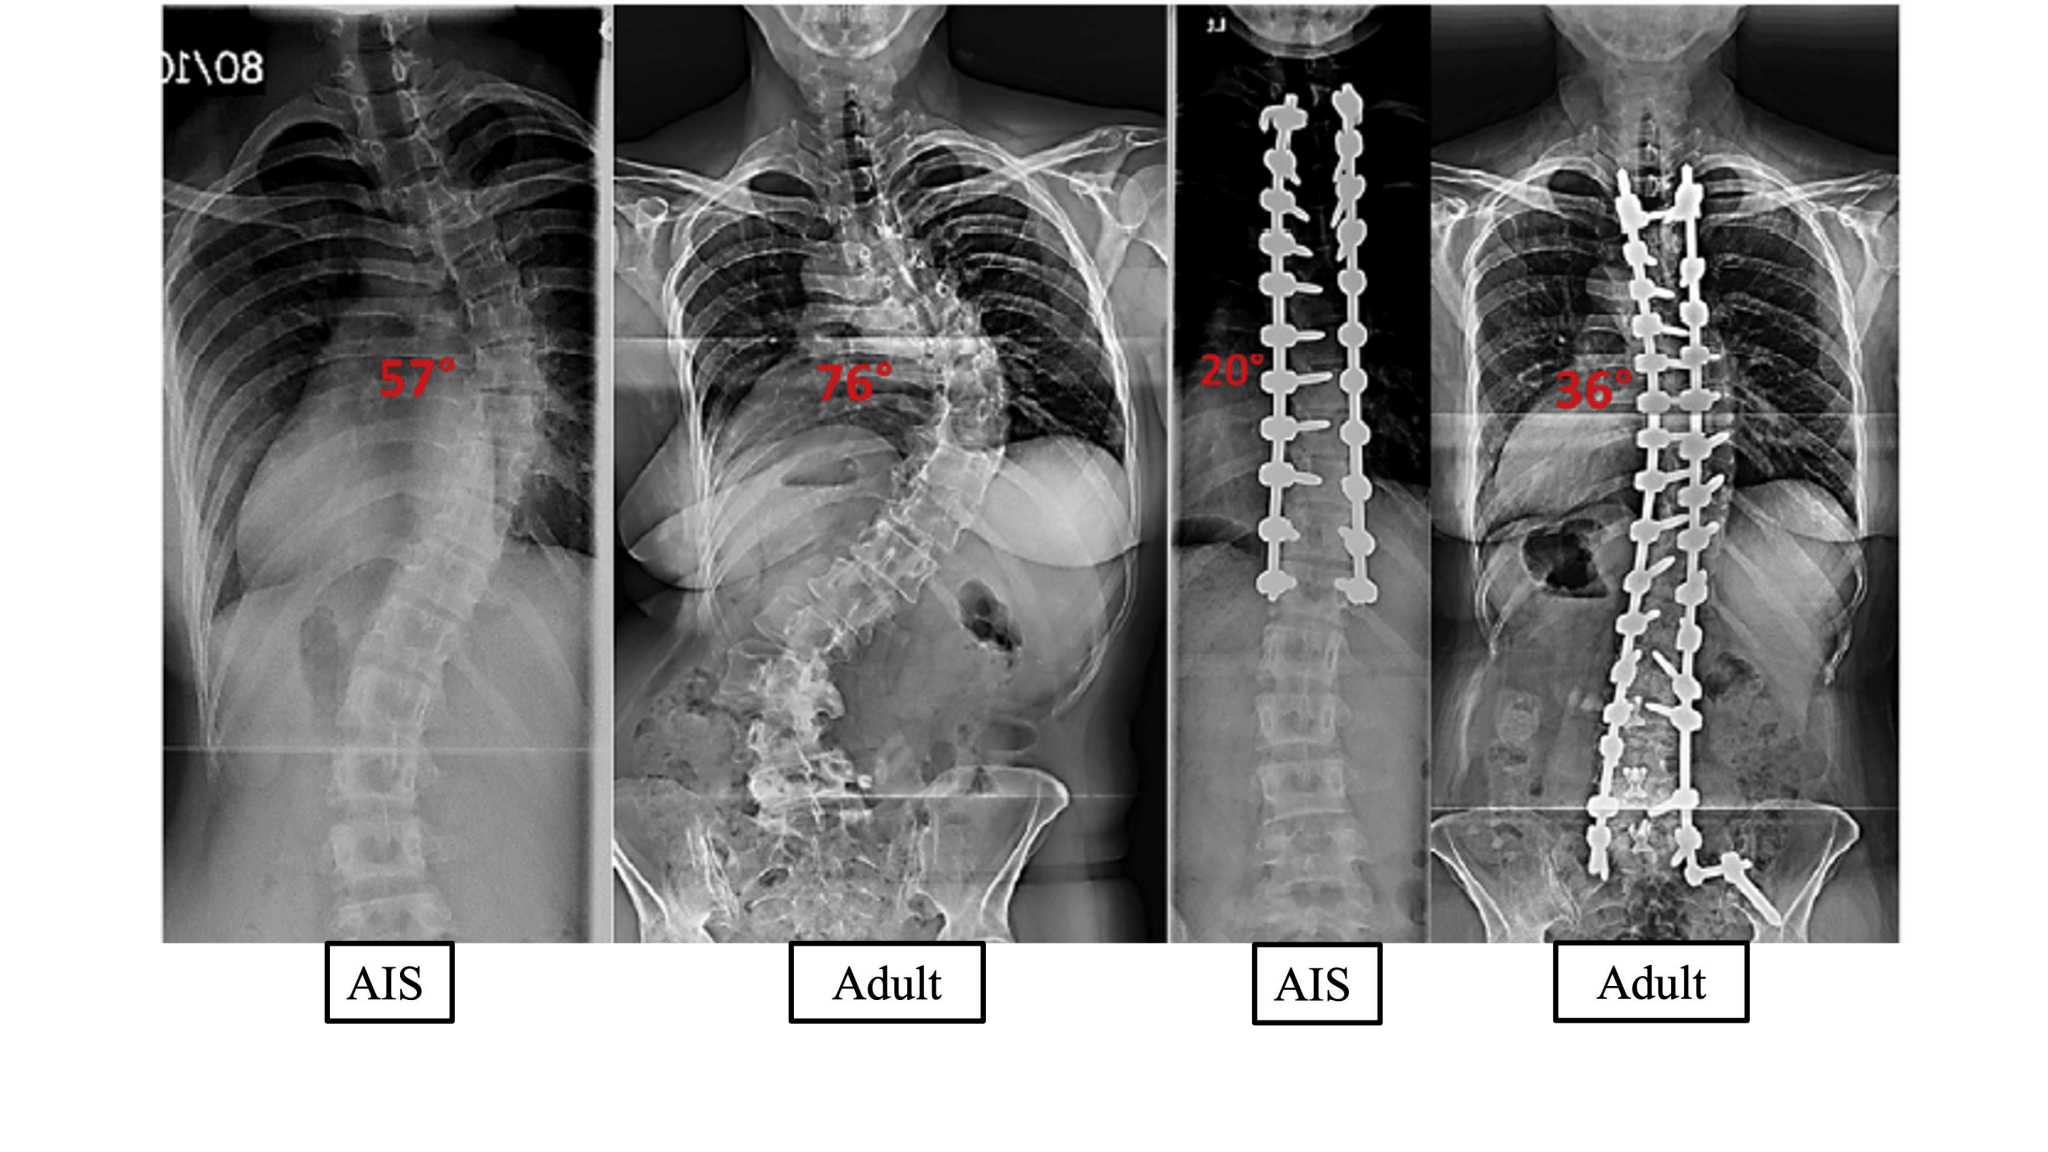 scoliosis types